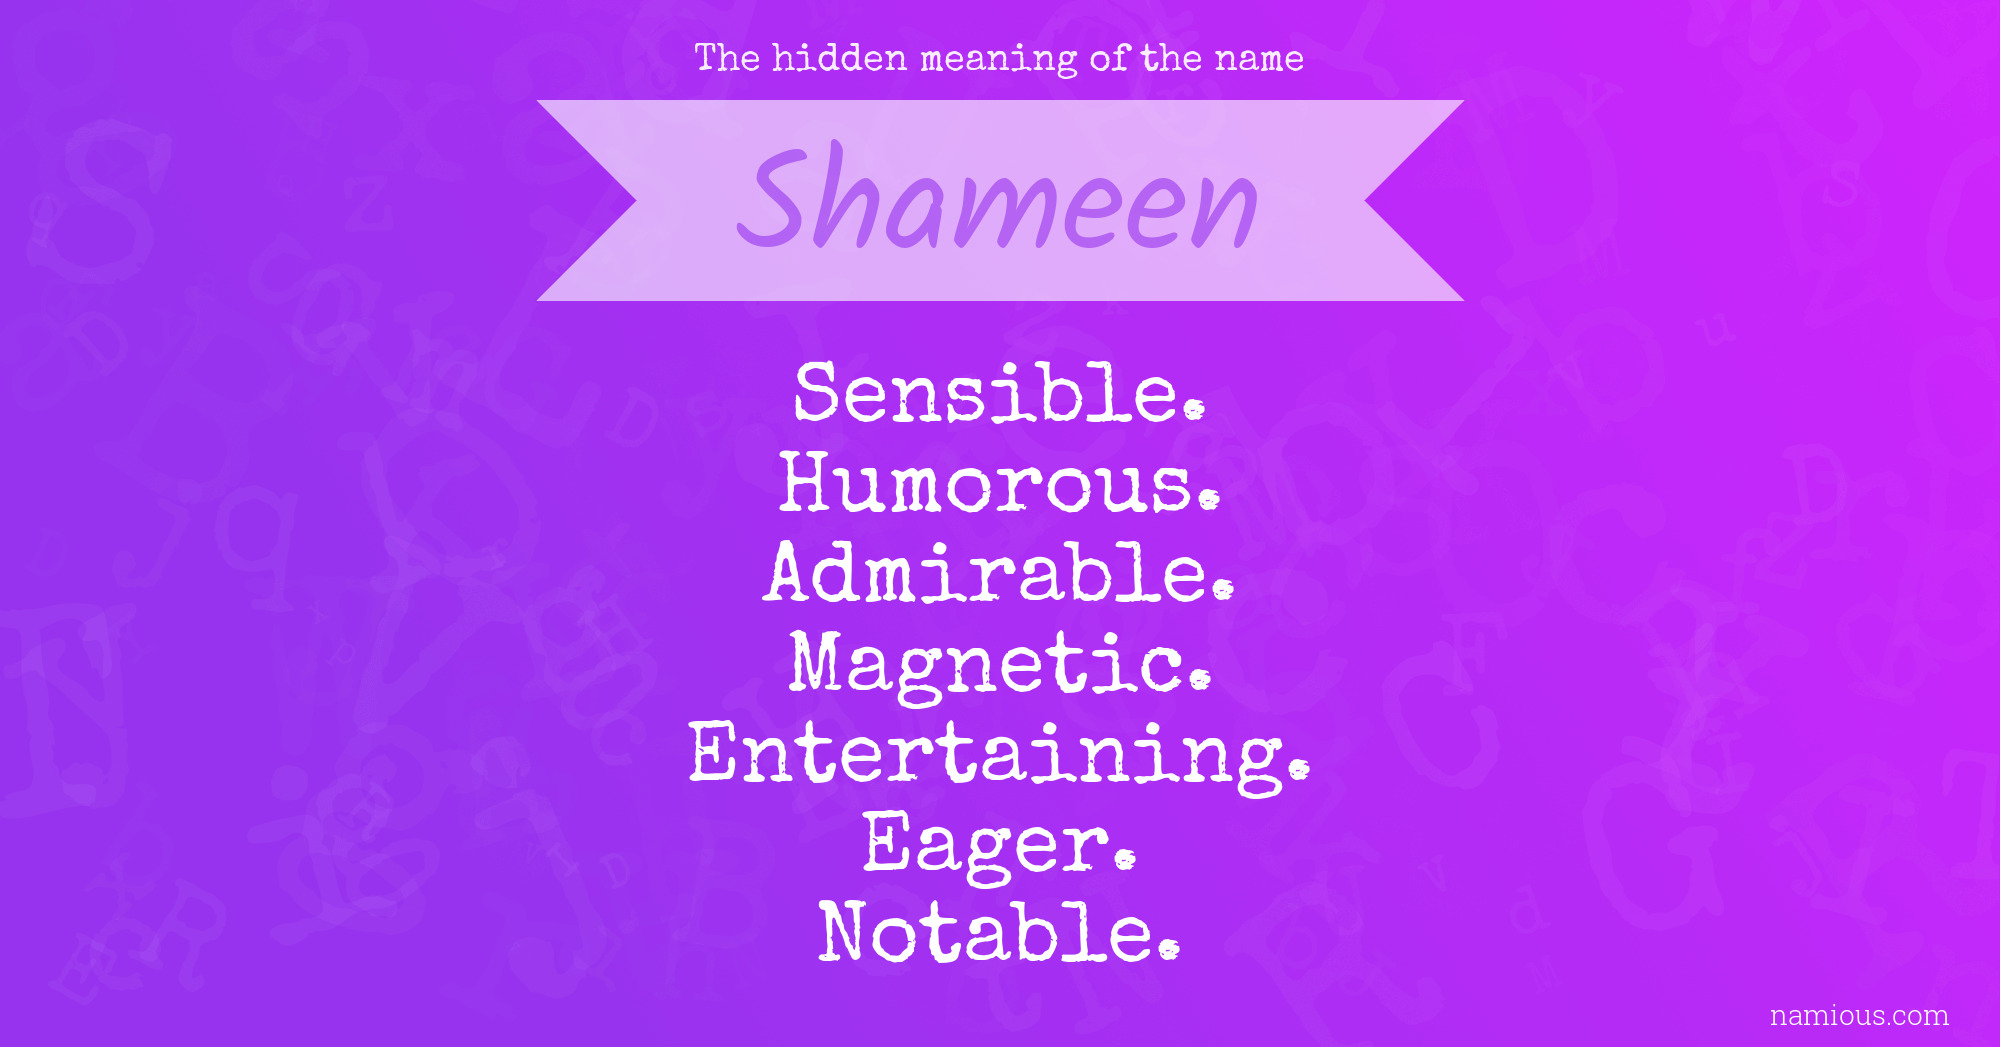 The hidden meaning of the name Shameen